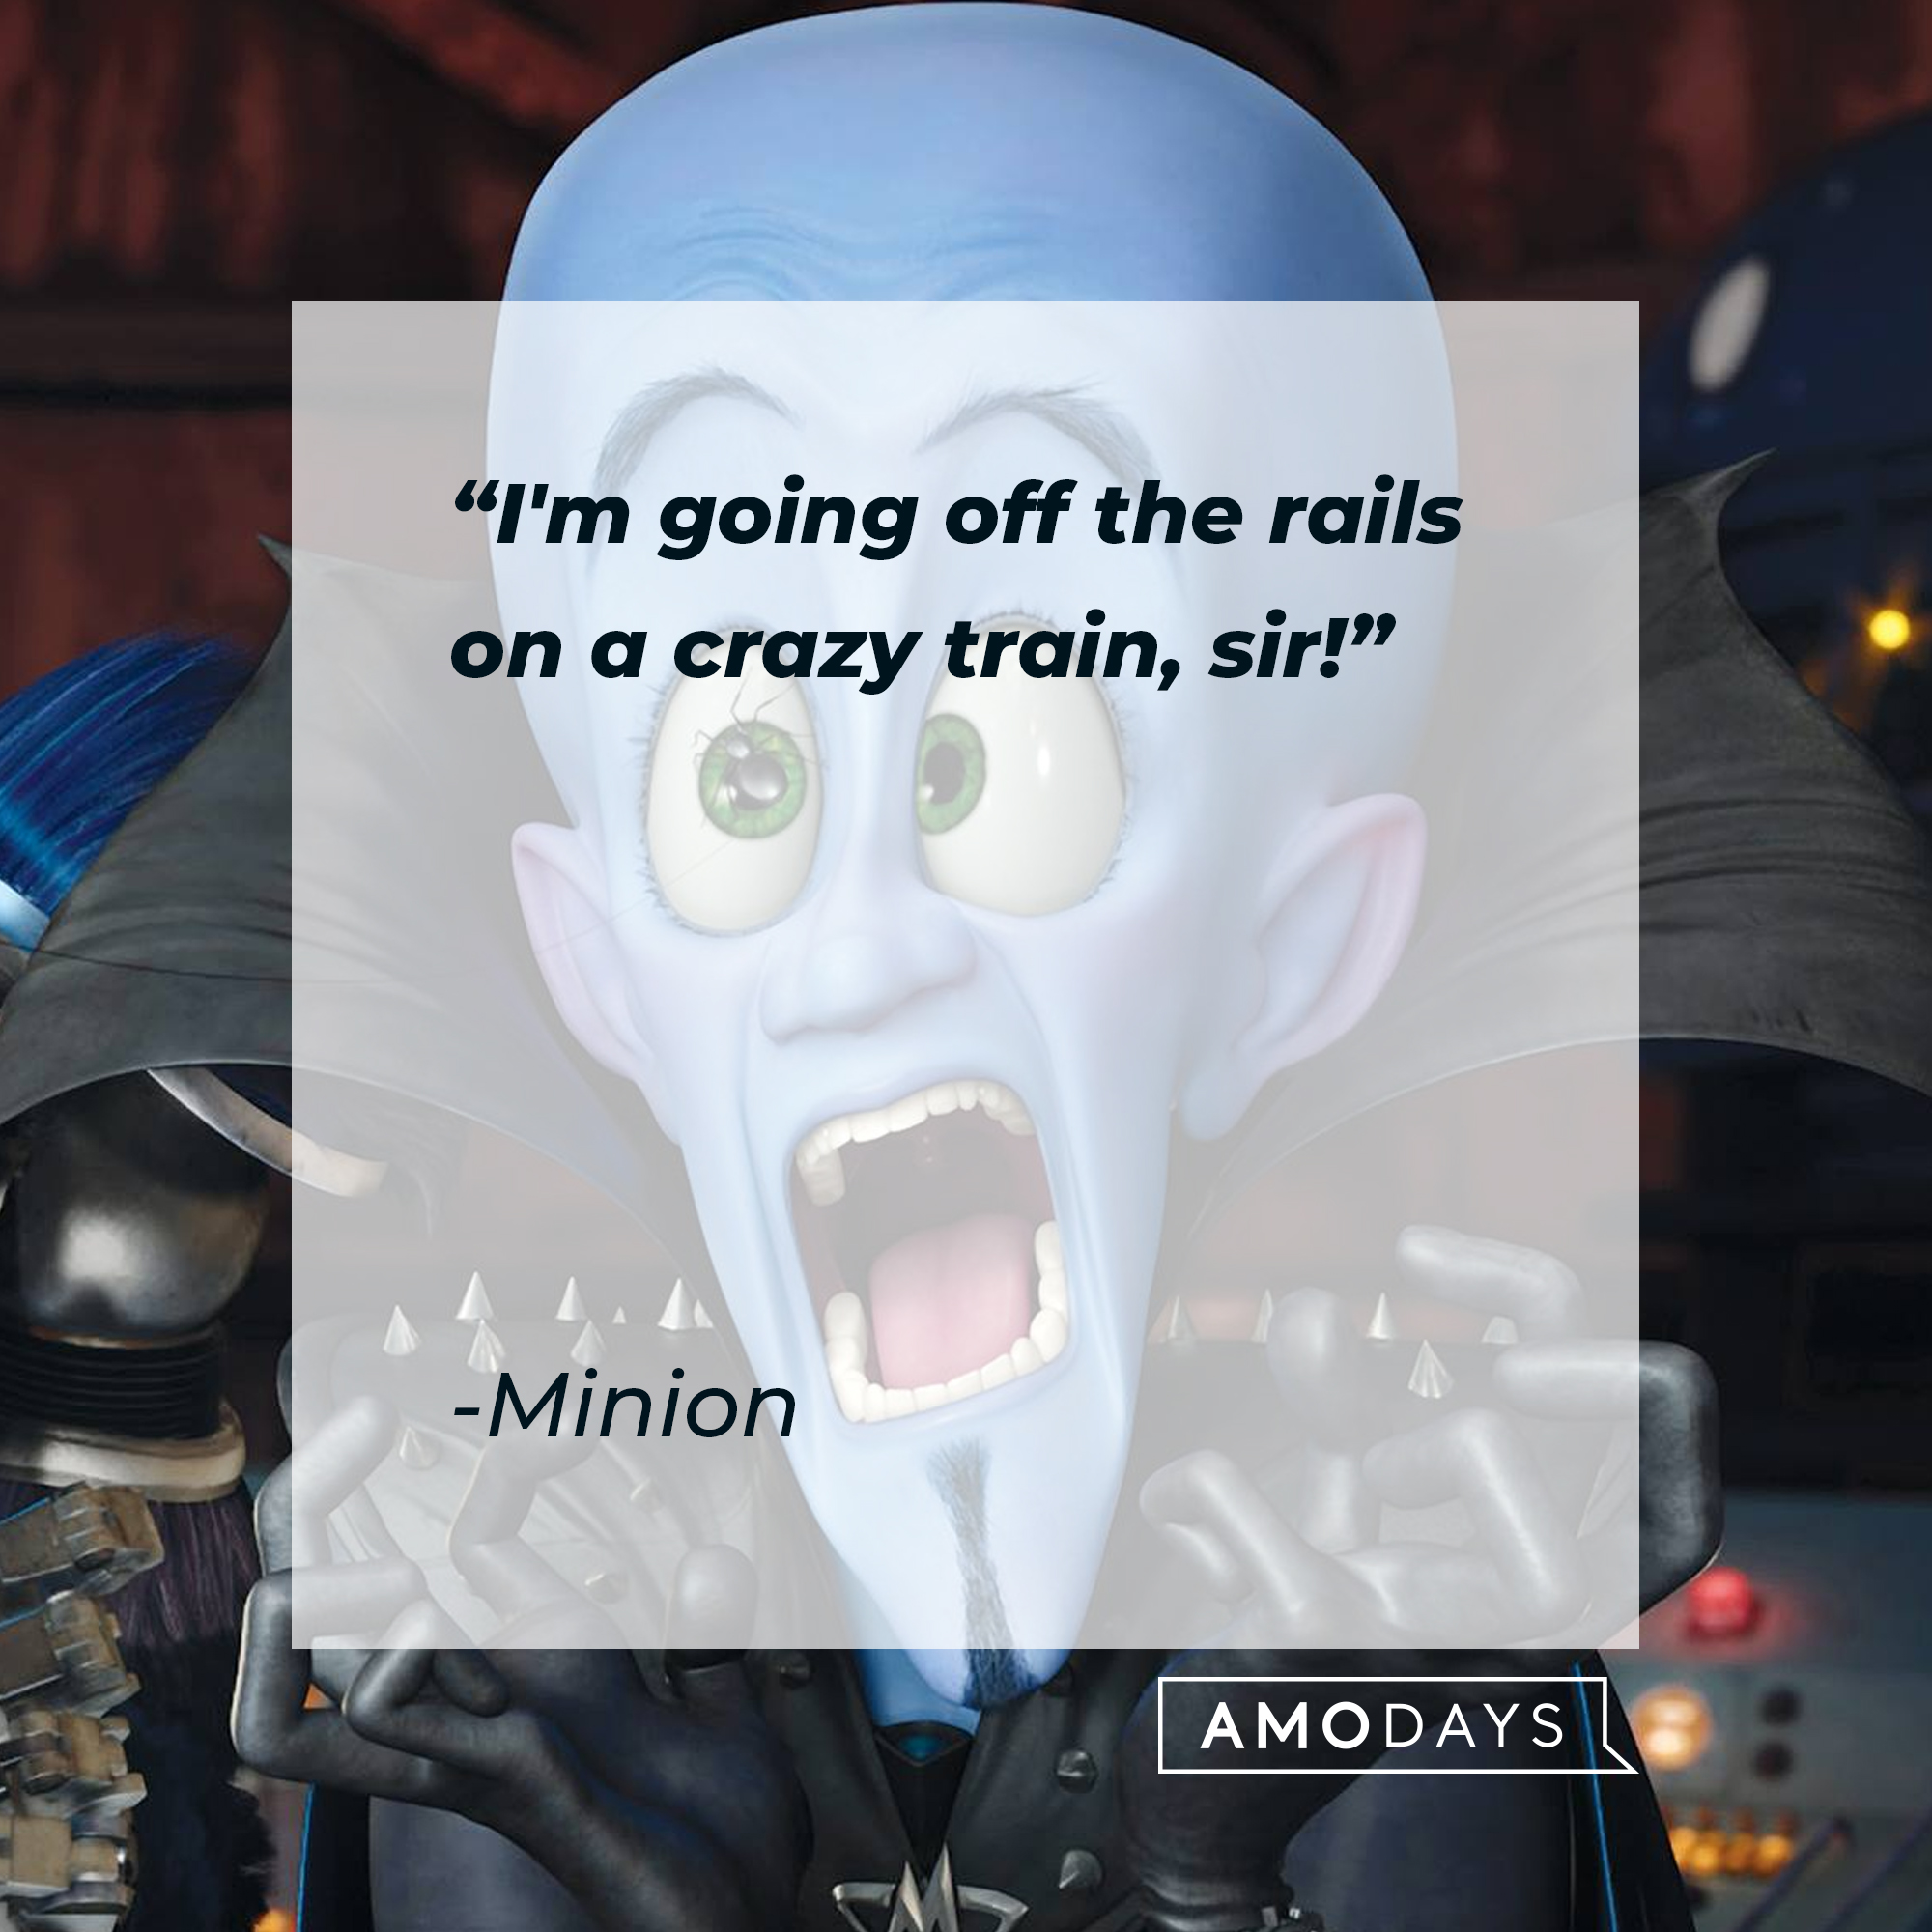 Minion's quote: "I'm going off the rails on a crazy train, sir!" | Source: Facebook.com/MegamindUK